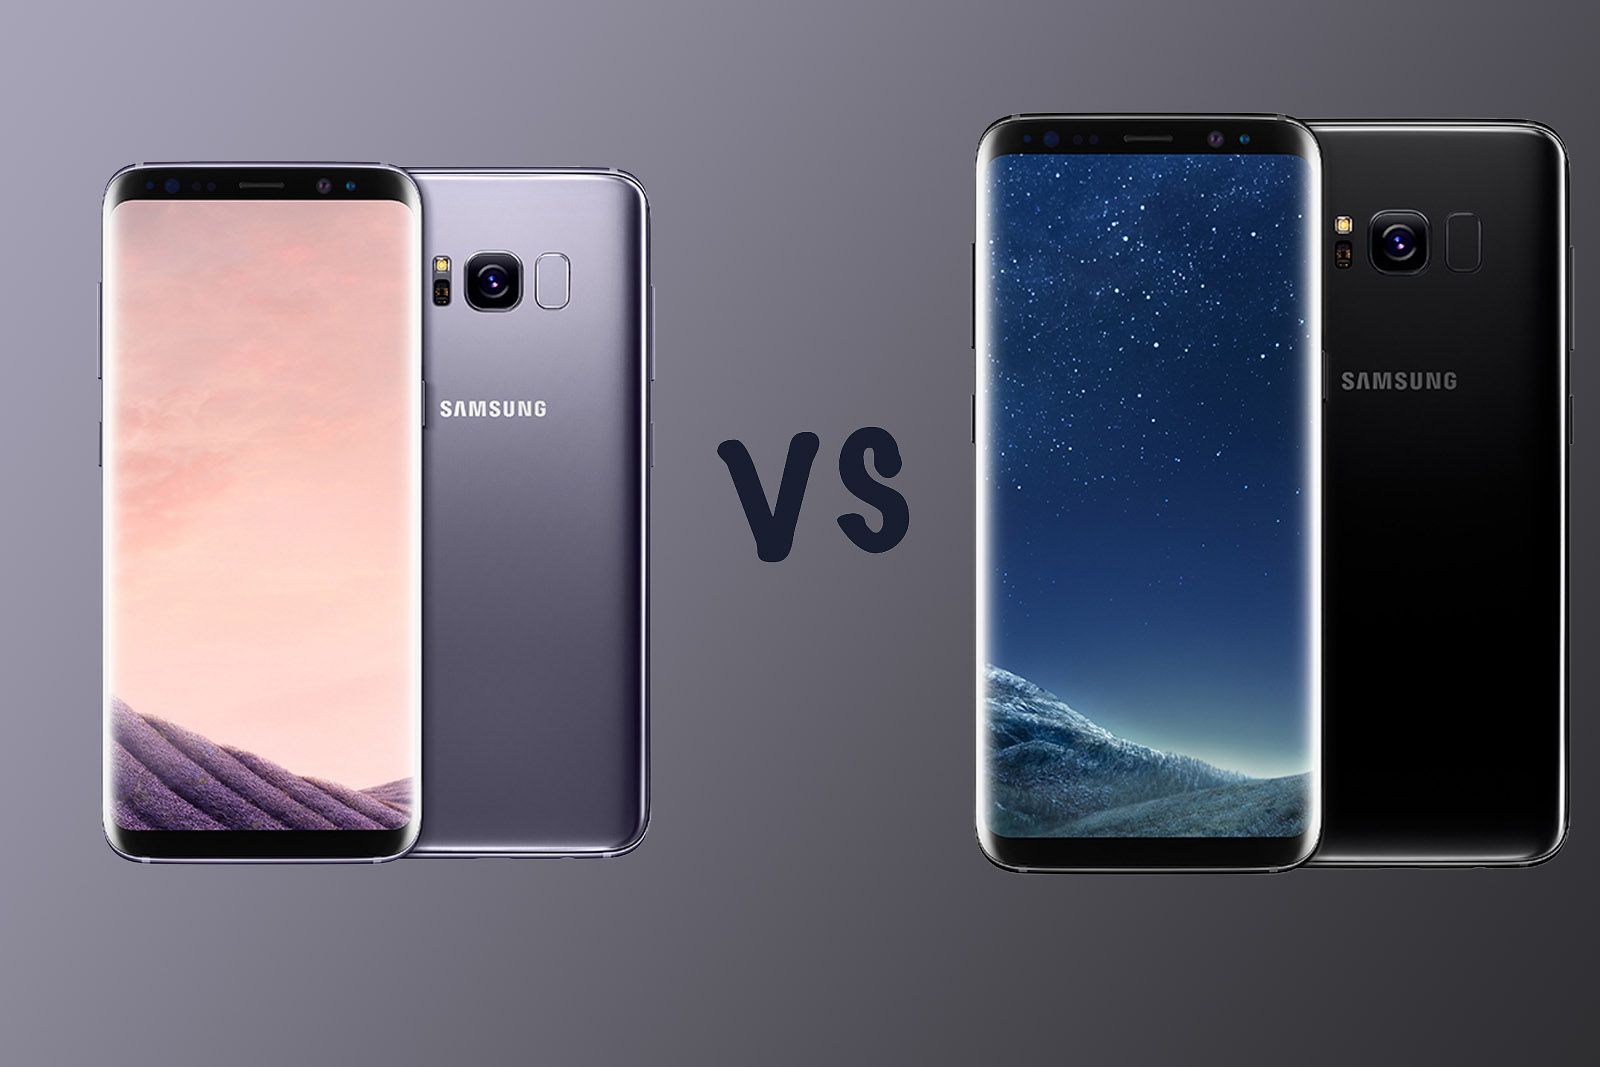 samsung galaxy s8 vs s8 plus which should you choose image 1